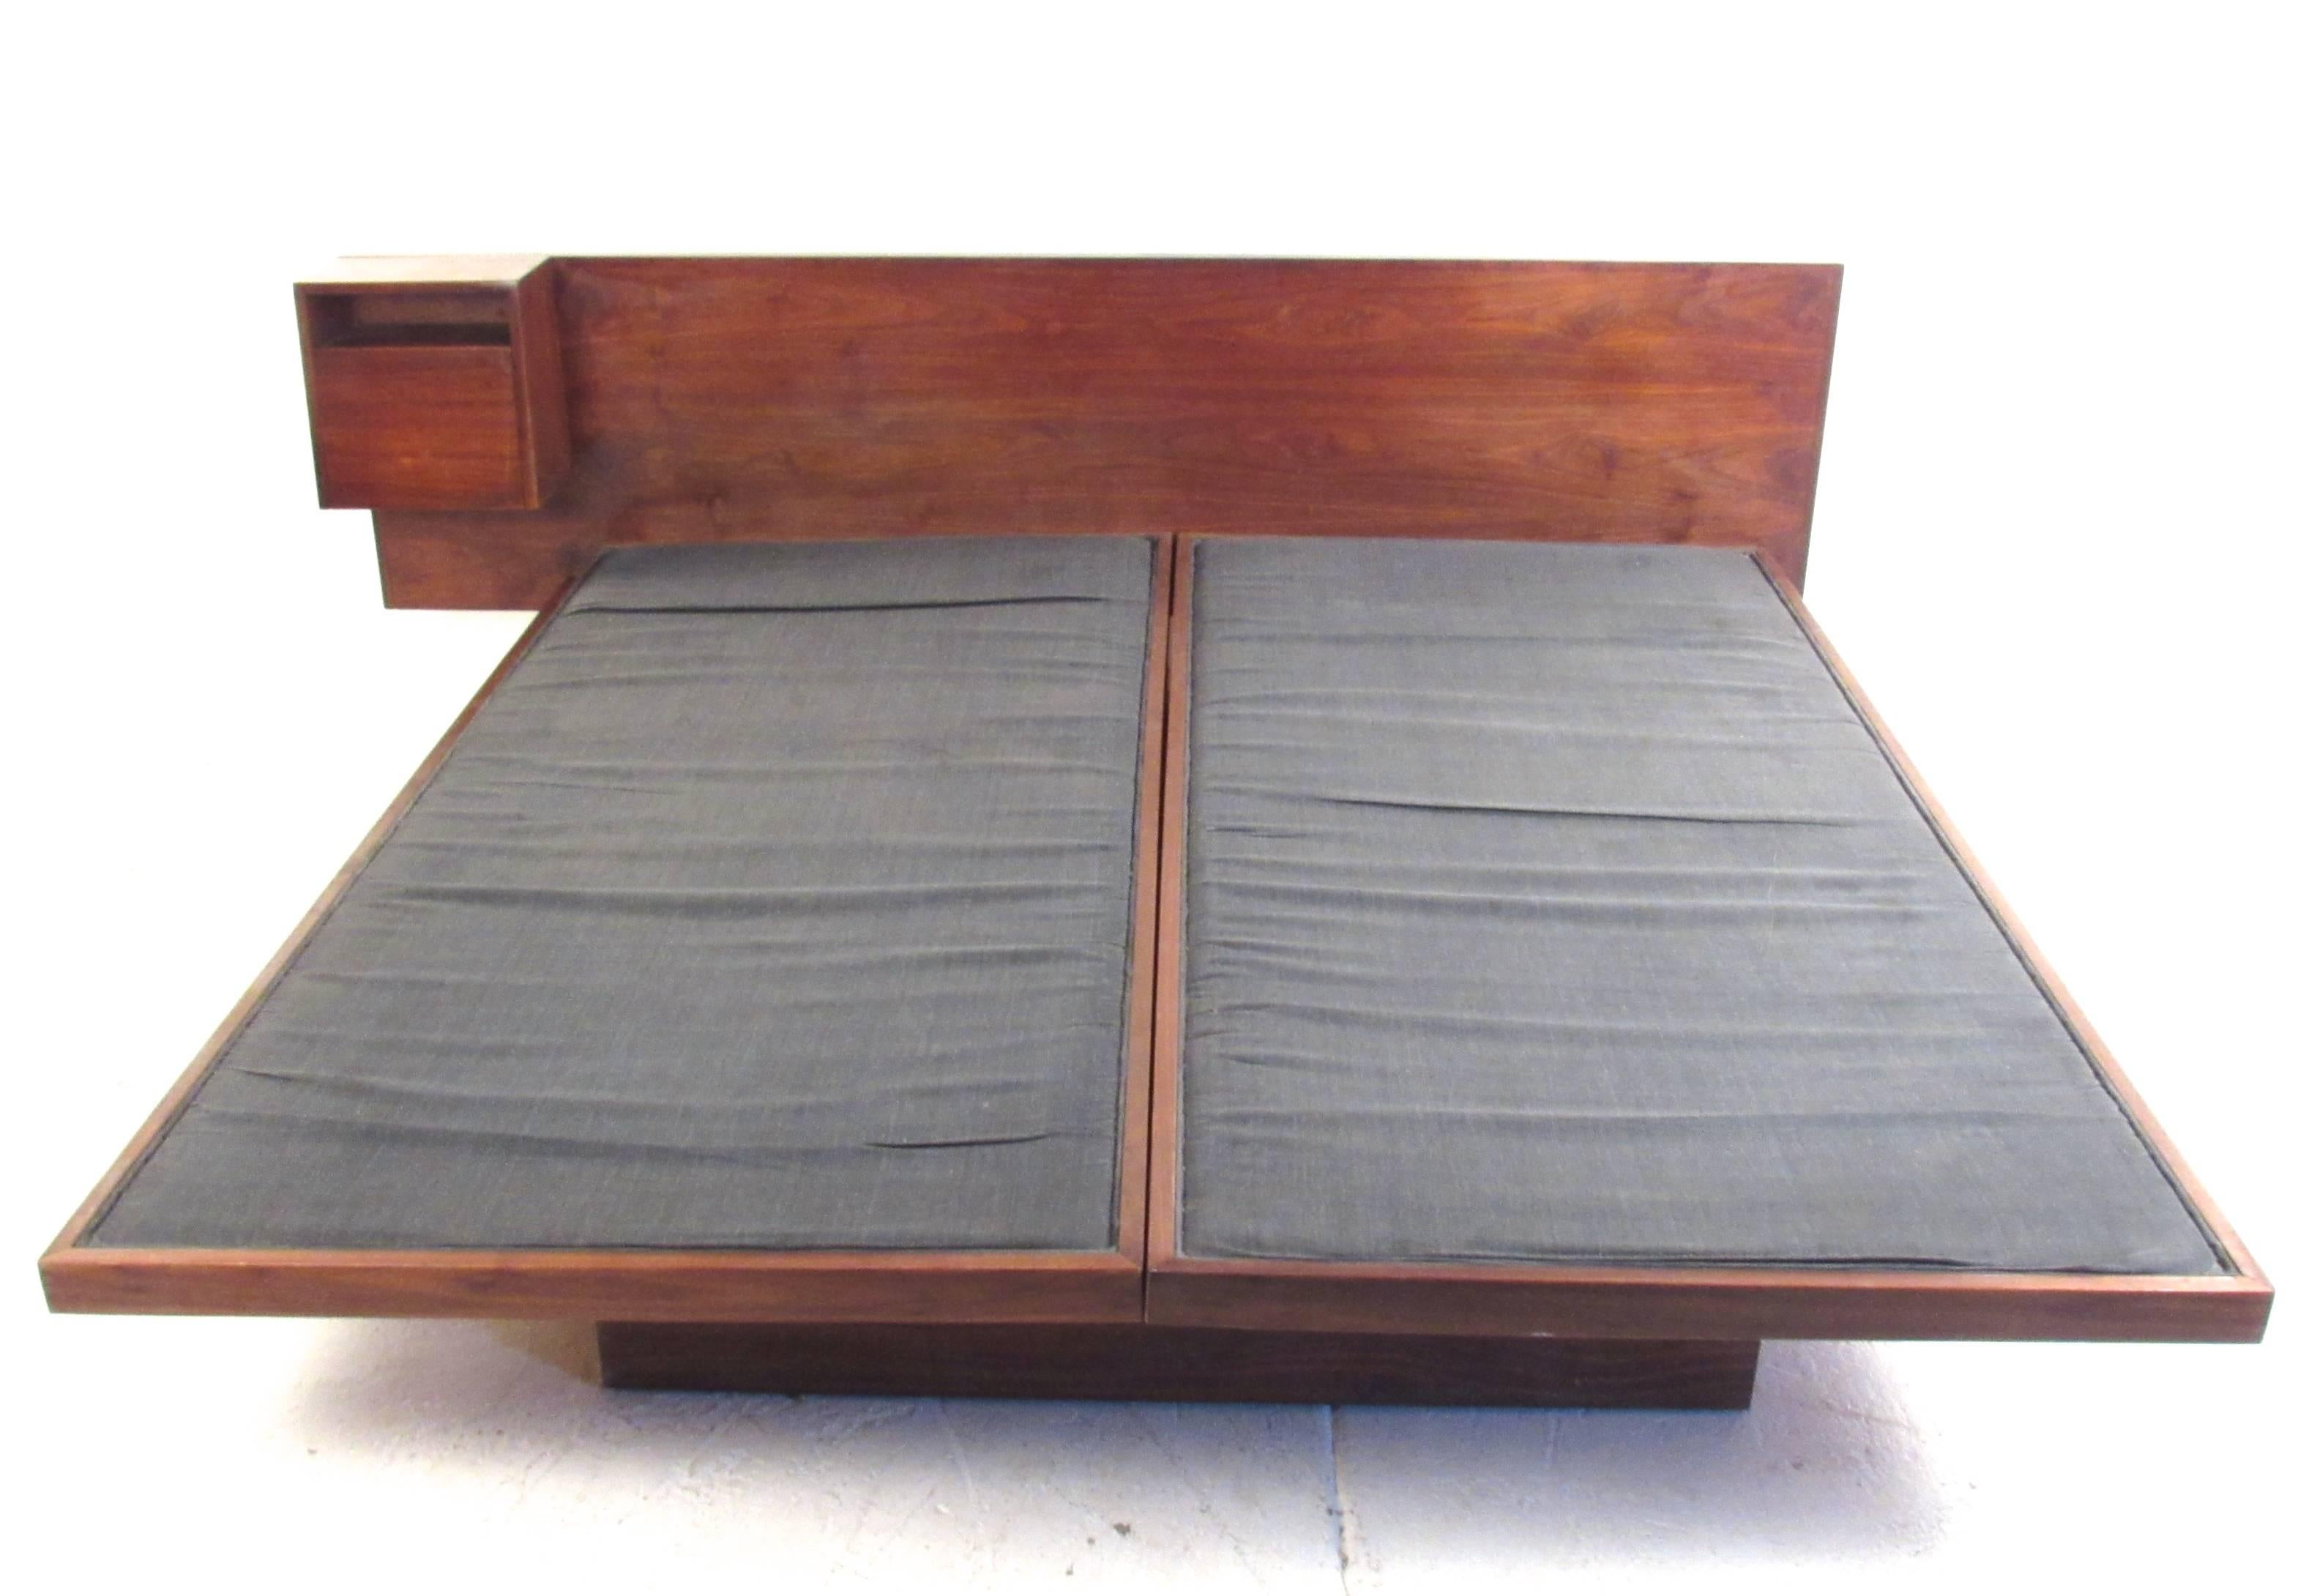 This unique teak platform bed features vintage hardwood king-size headboard with a mounted teak end table. Drop-front cabinet with added cubby for storage makes a convenient bedside storage compartment which the impressive size of this Mid-Century